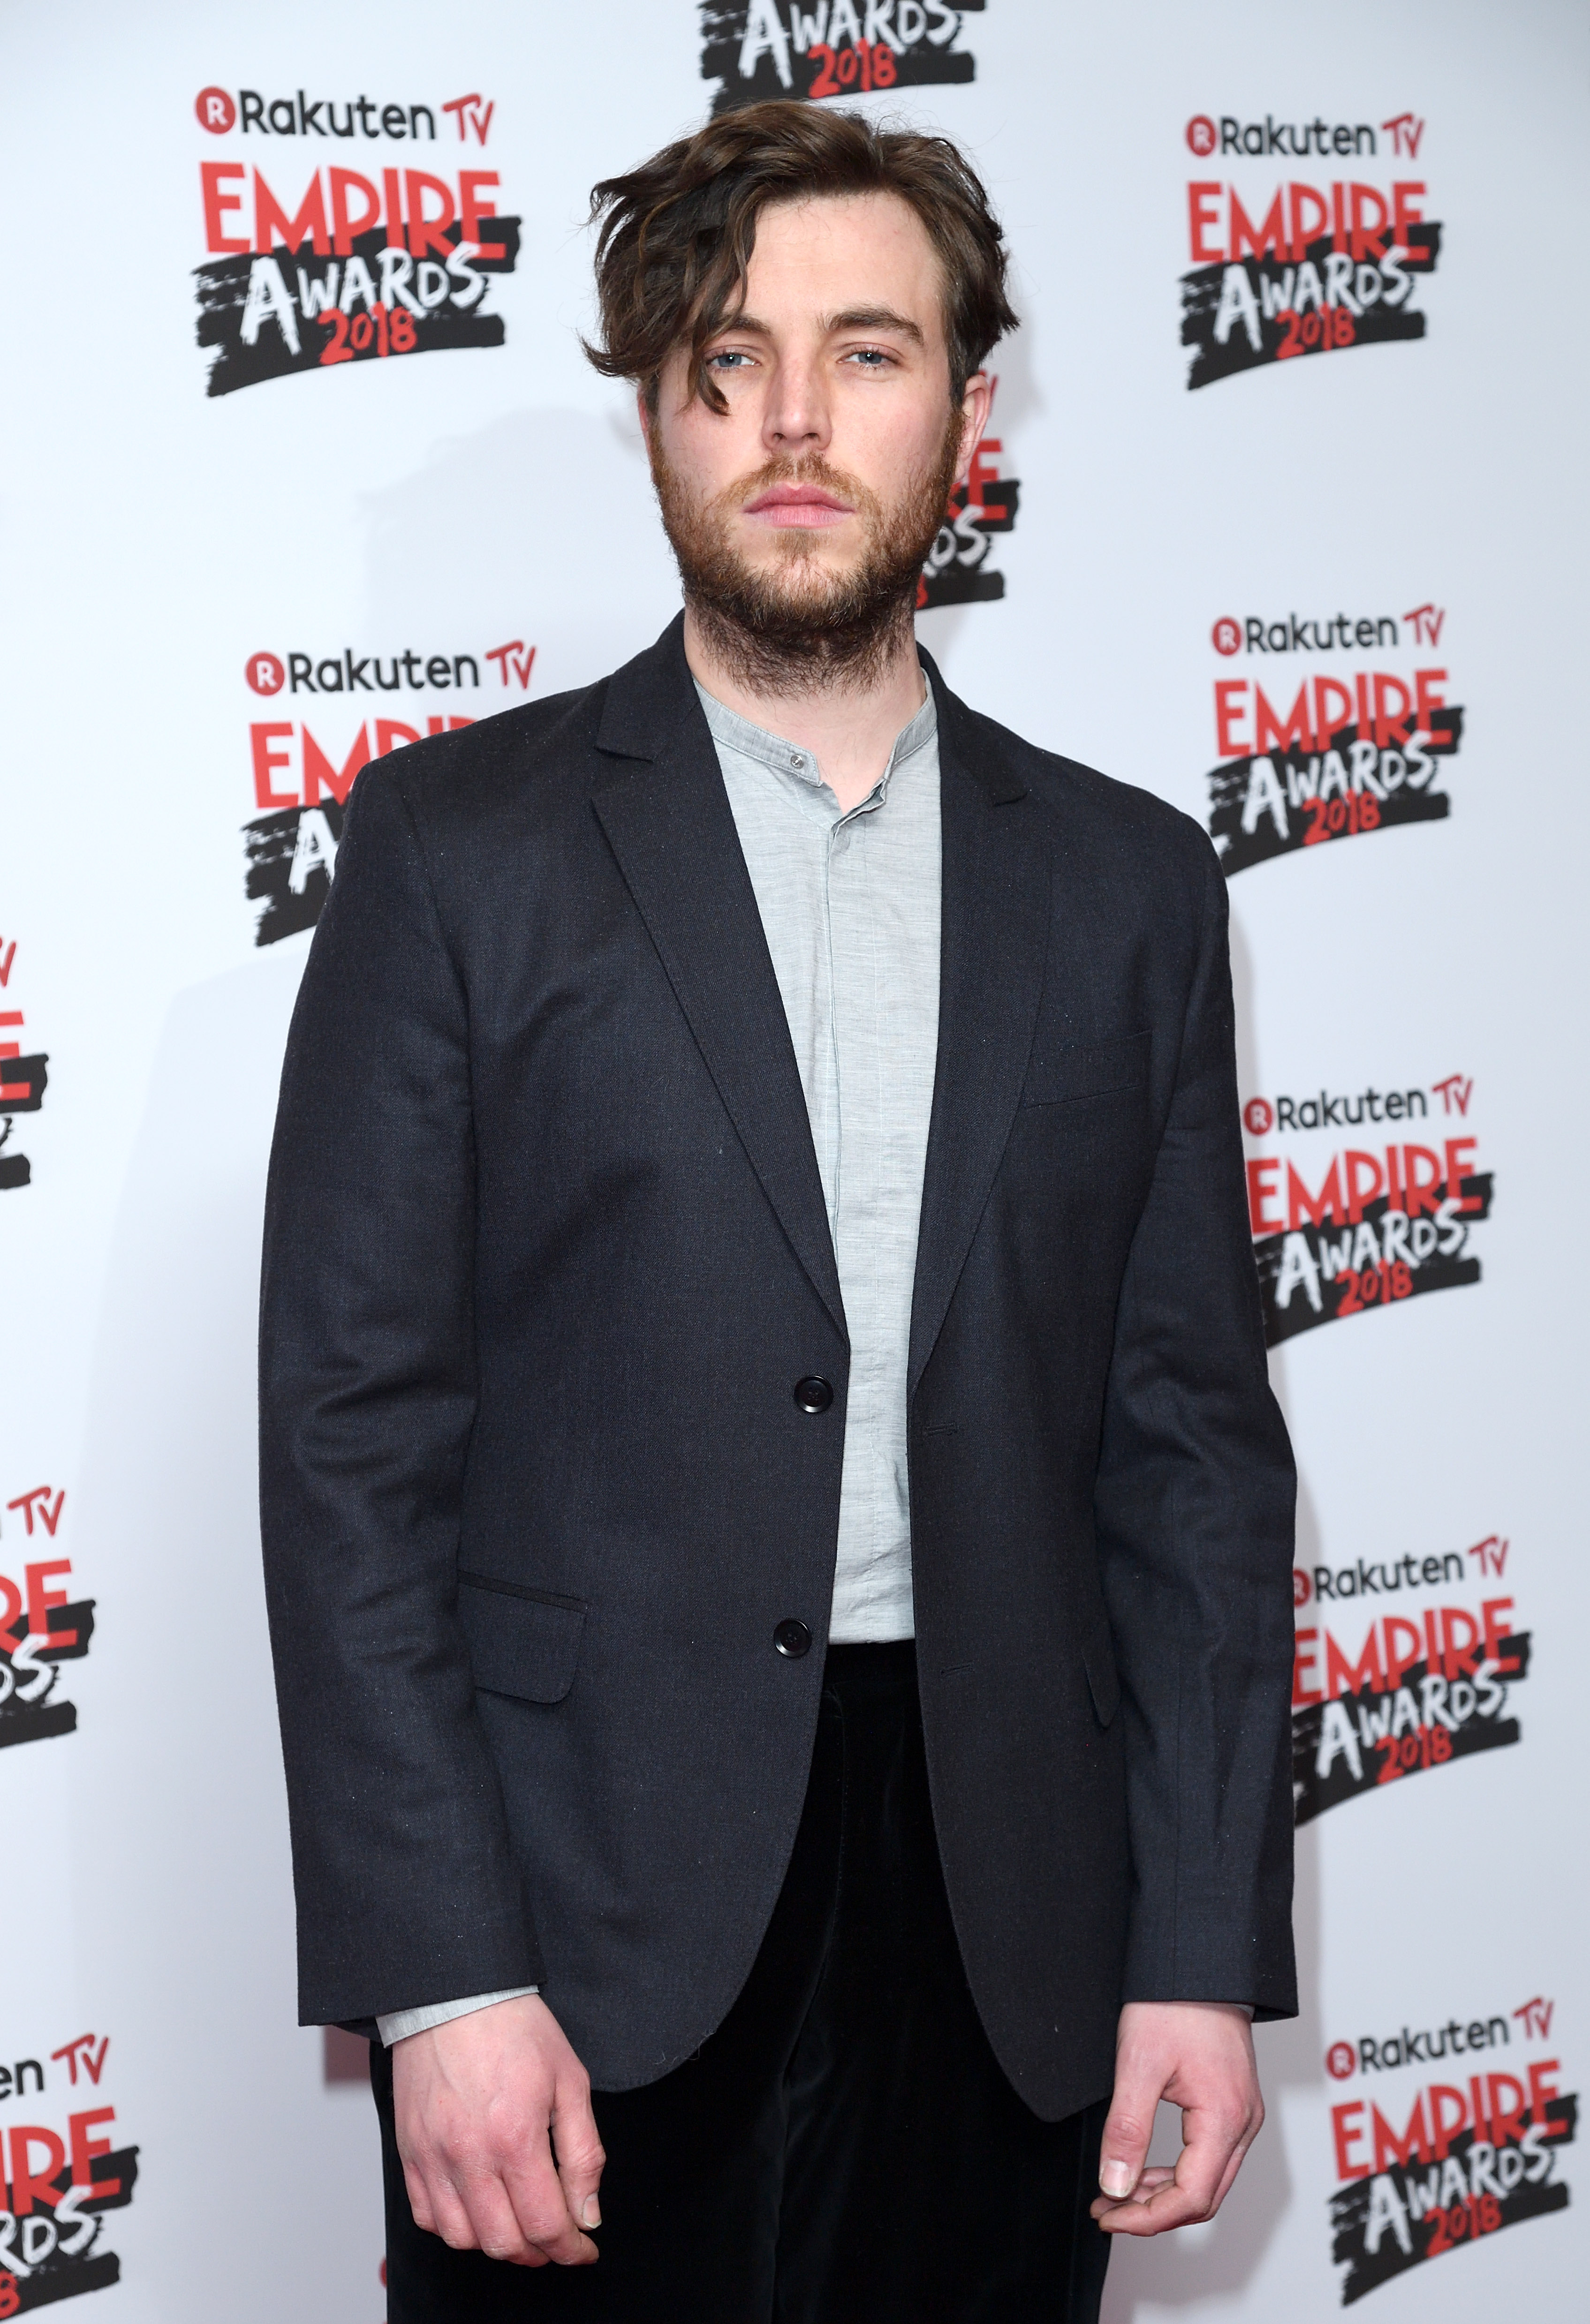 Tom Hughes at the Rakuten TV EMPIRE Awards 2018 on March 18, 2018 in London, England | Source: Getty Images